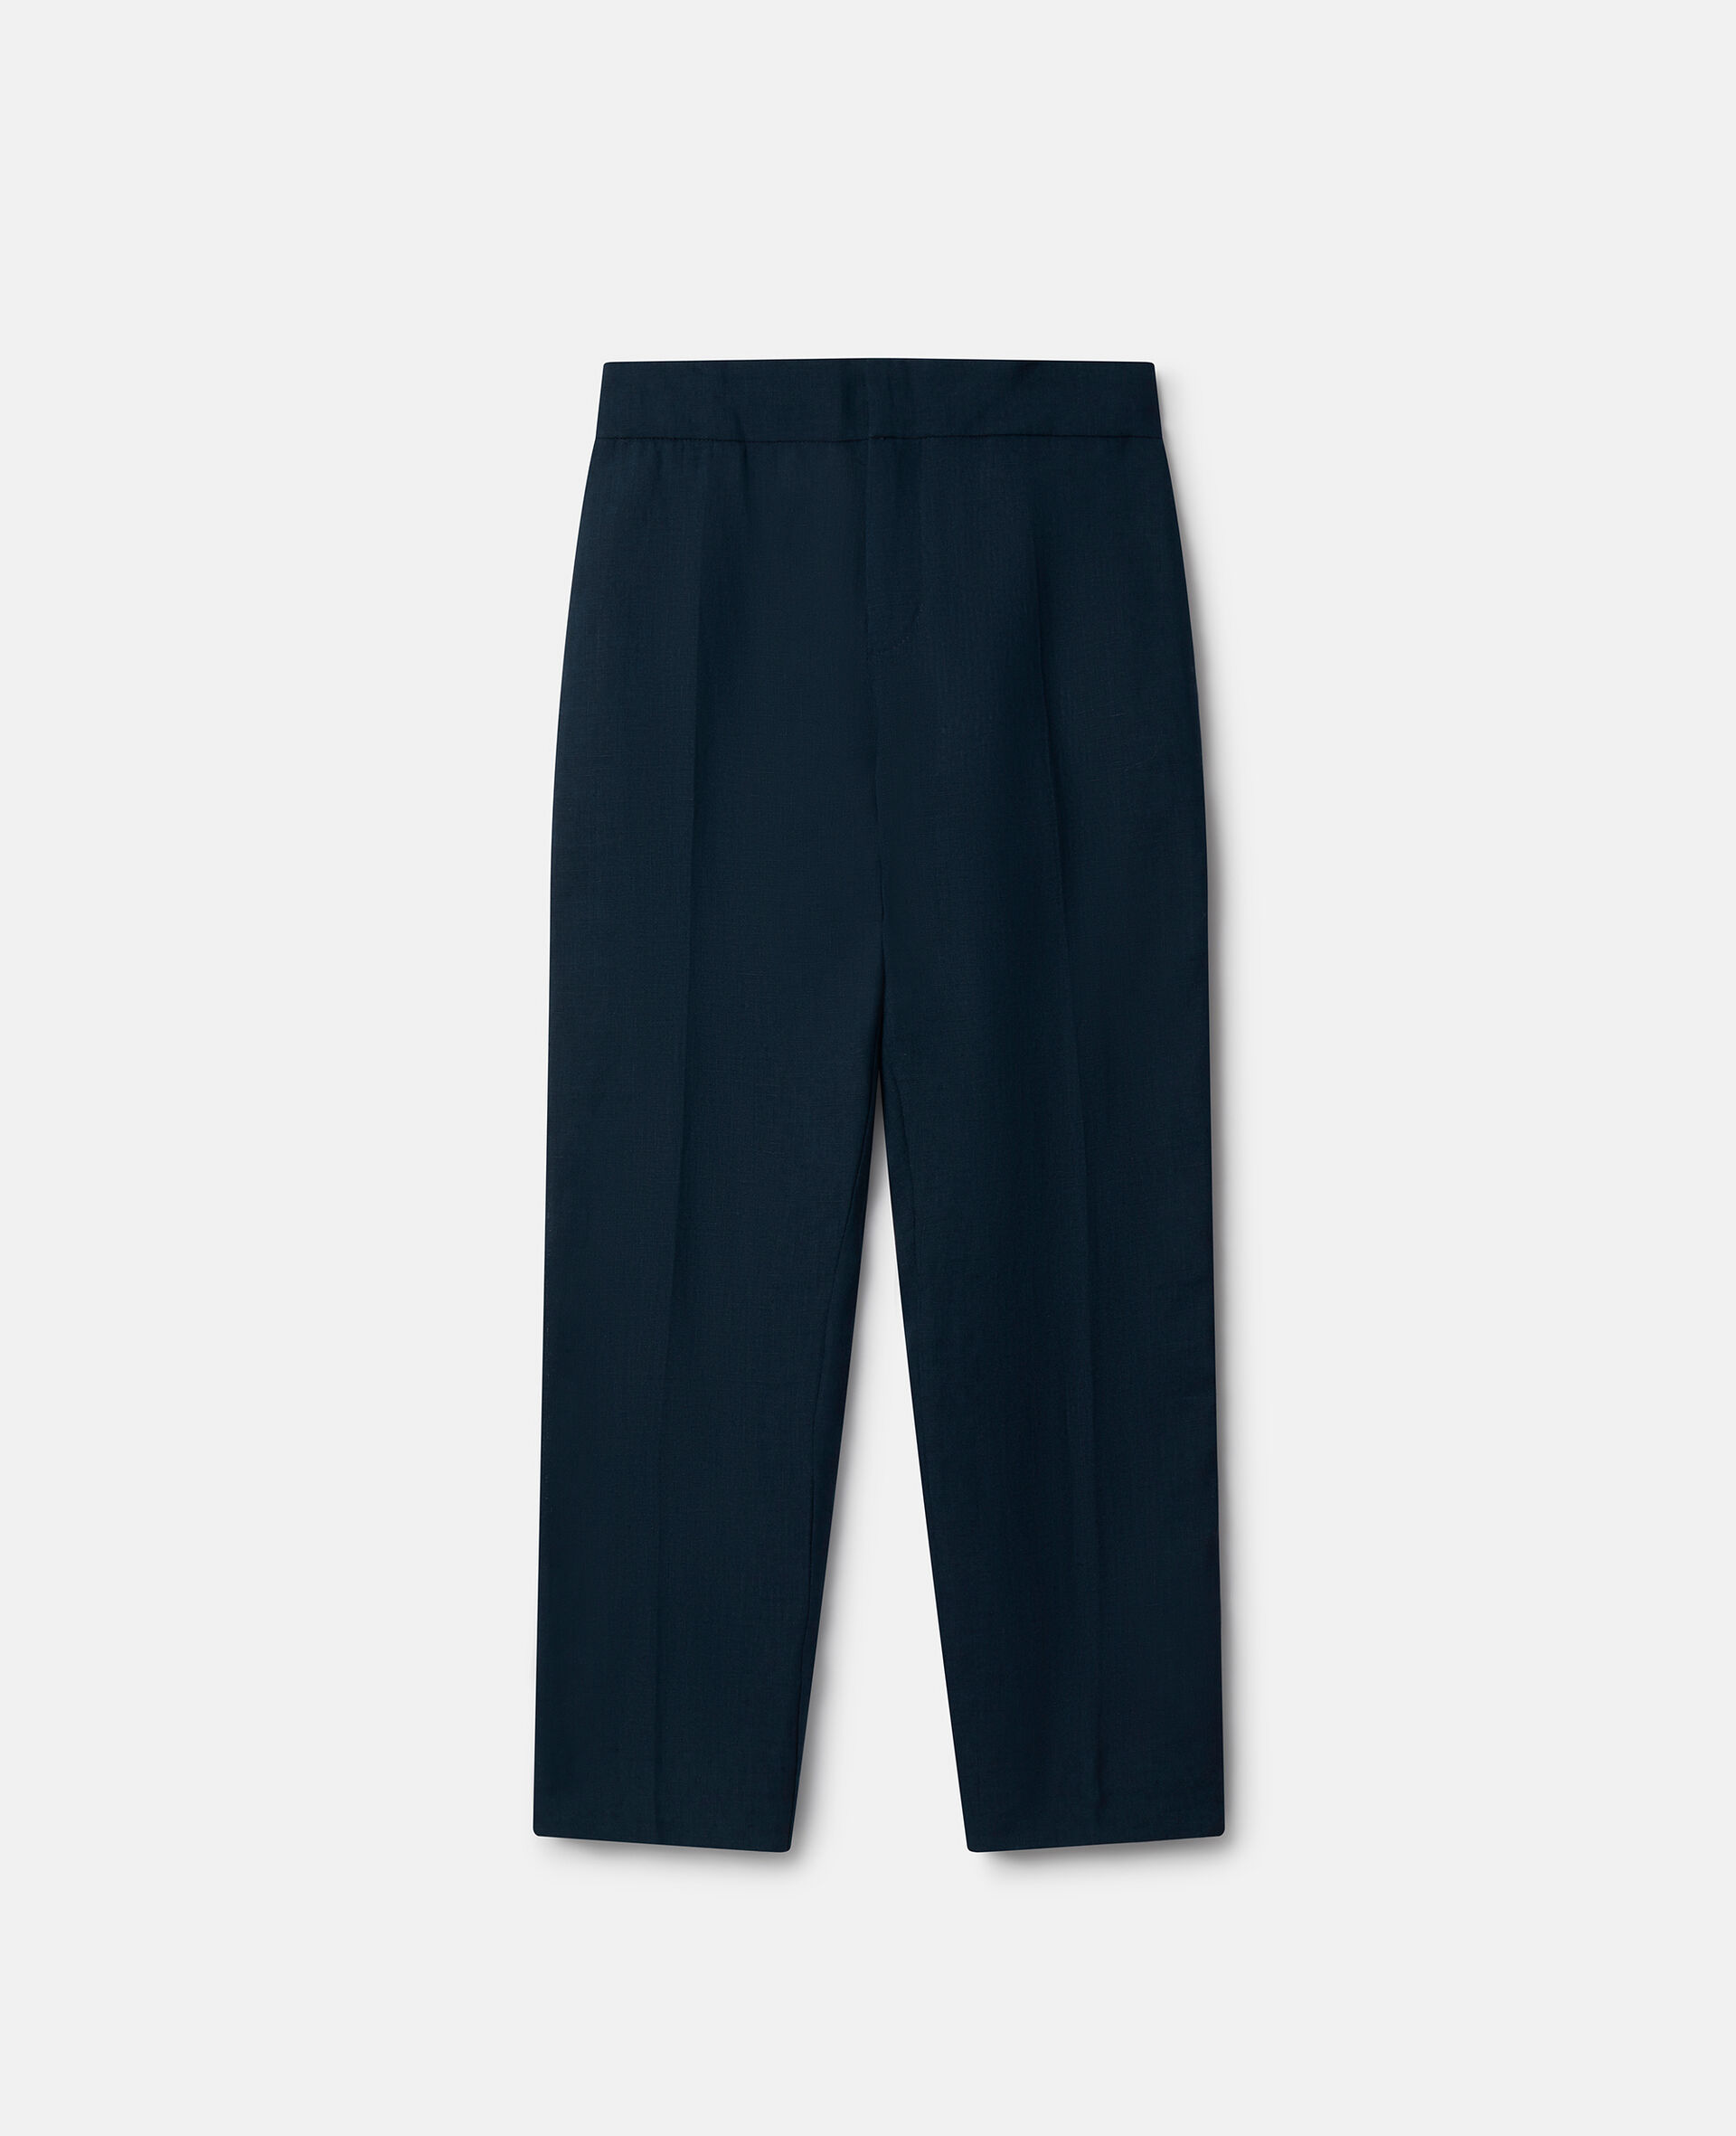 Linen Tailored Trousers-블루-large image number 0